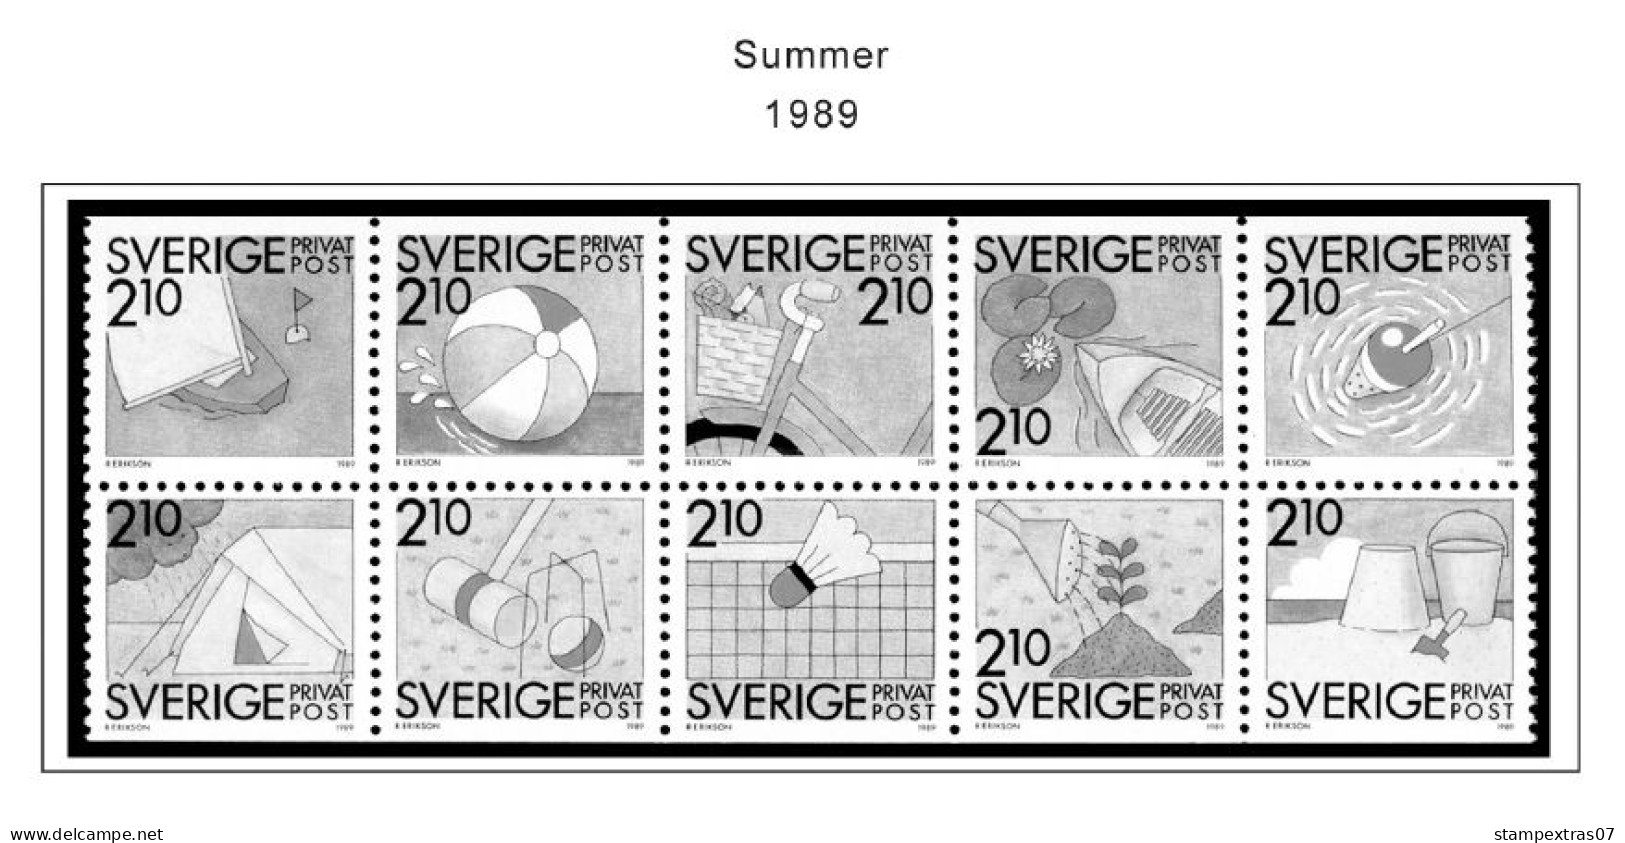 SWEDEN 1855-2010 STAMP ALBUM PAGES (264 b&w illustrated pages)